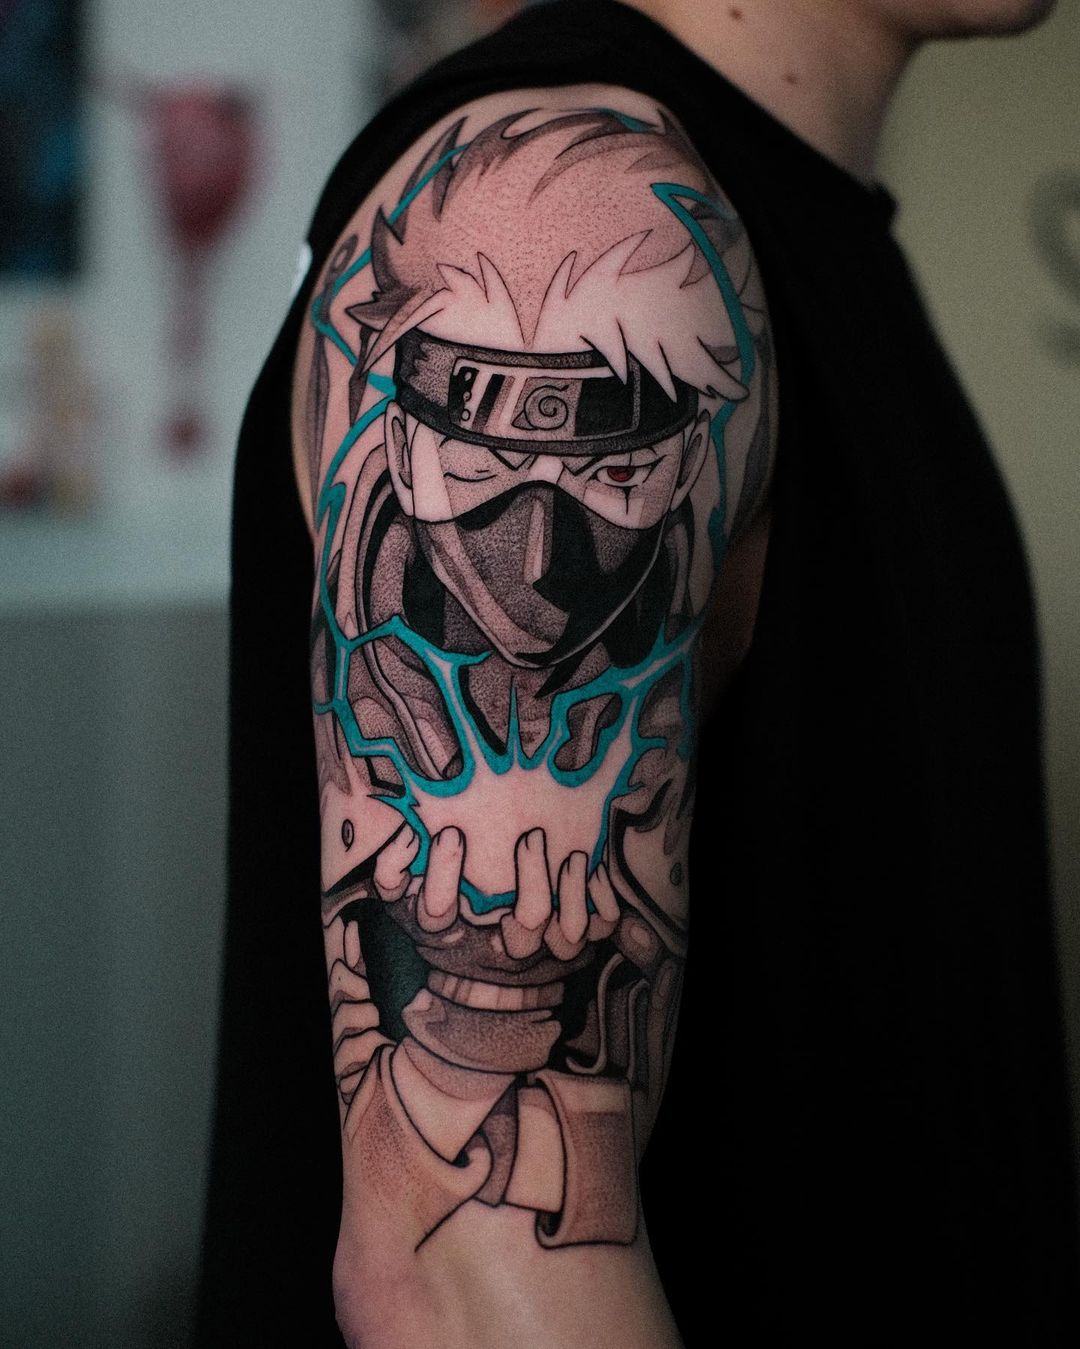 101 Best Kakashi Tattoo Ideas You Have To See To Believe!